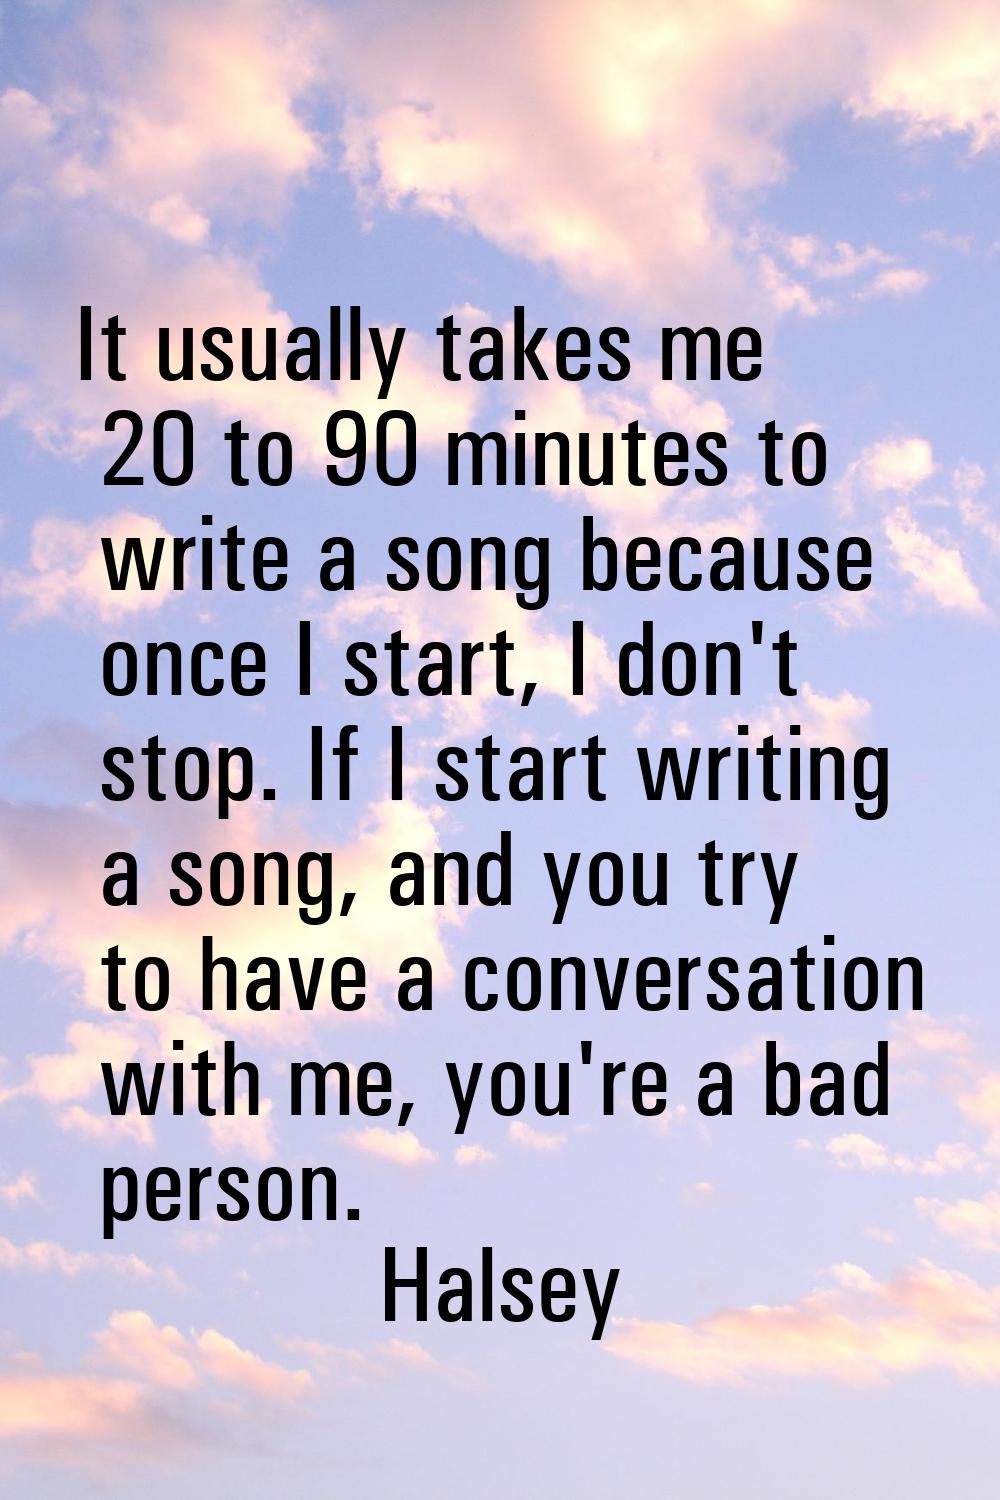 It usually takes me 20 to 90 minutes to write a song because once I start, I don't stop. If I start